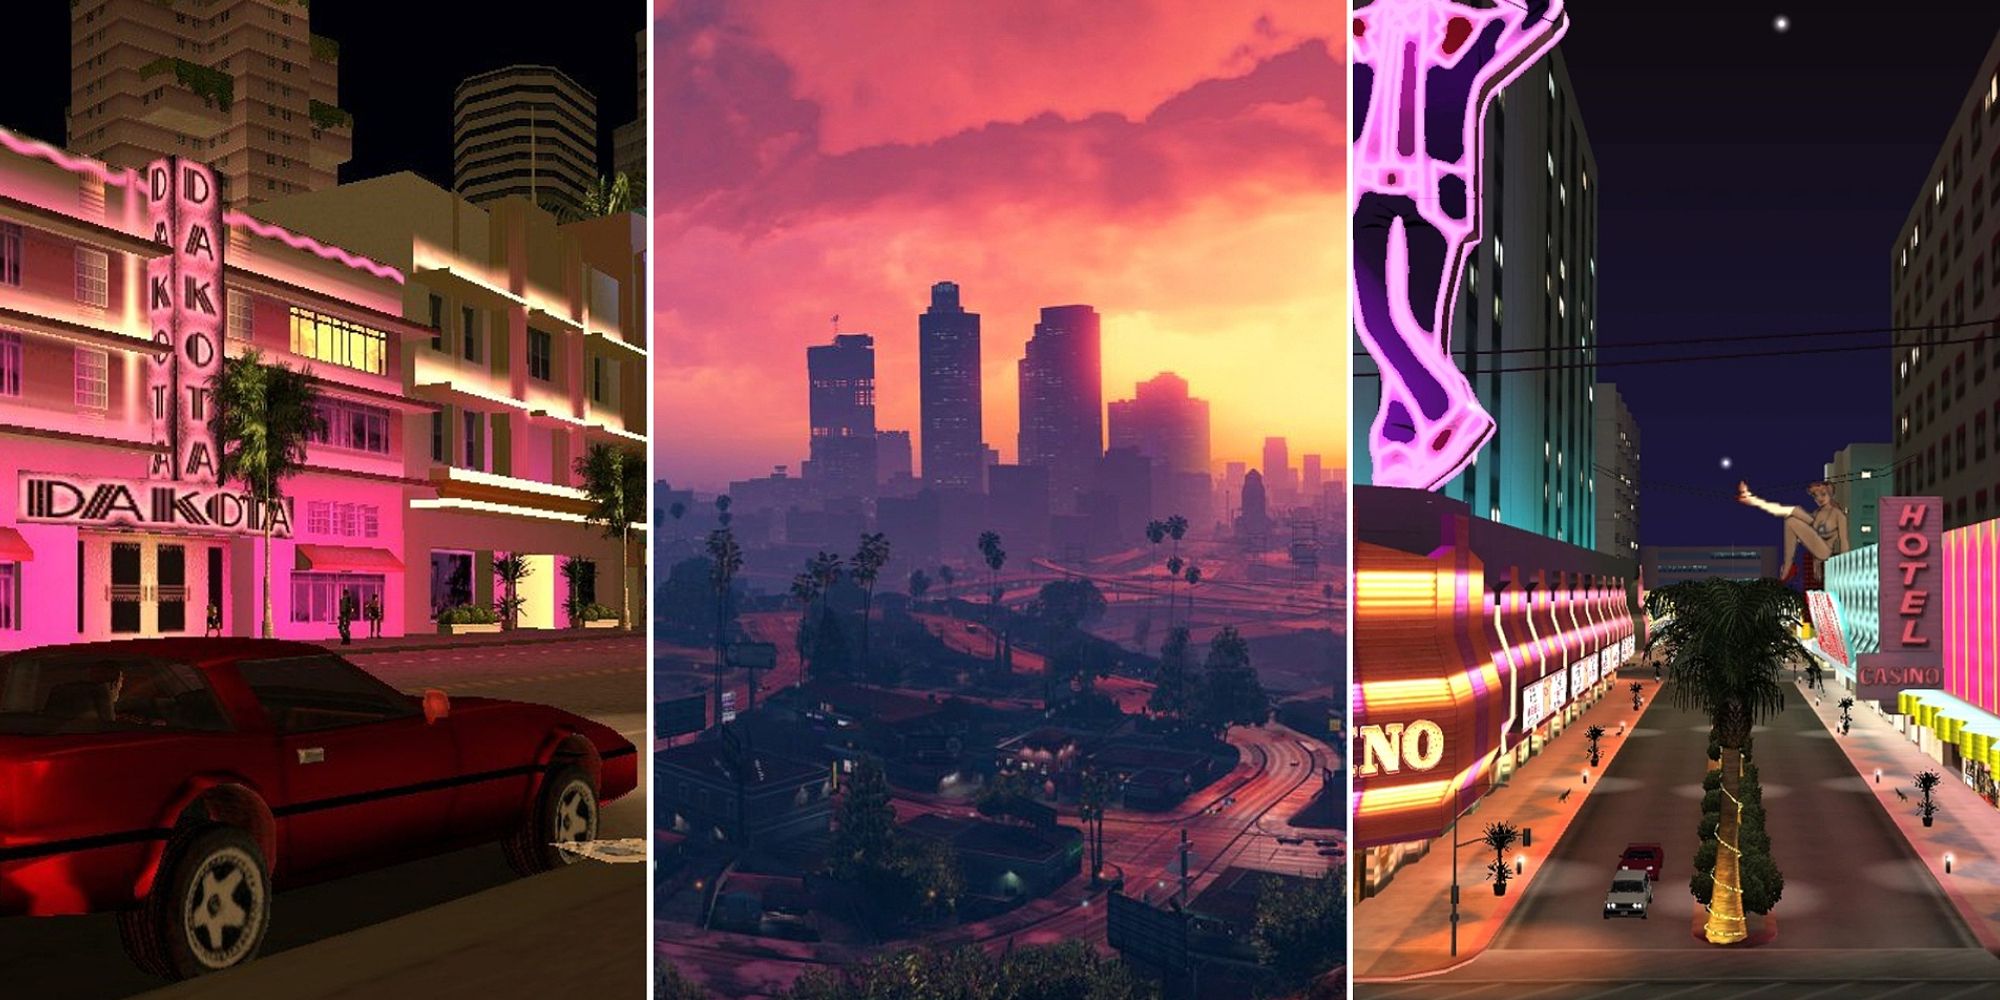 A collage of colourful images featuring a neon lit street, a skyline at sunset and another street of neon